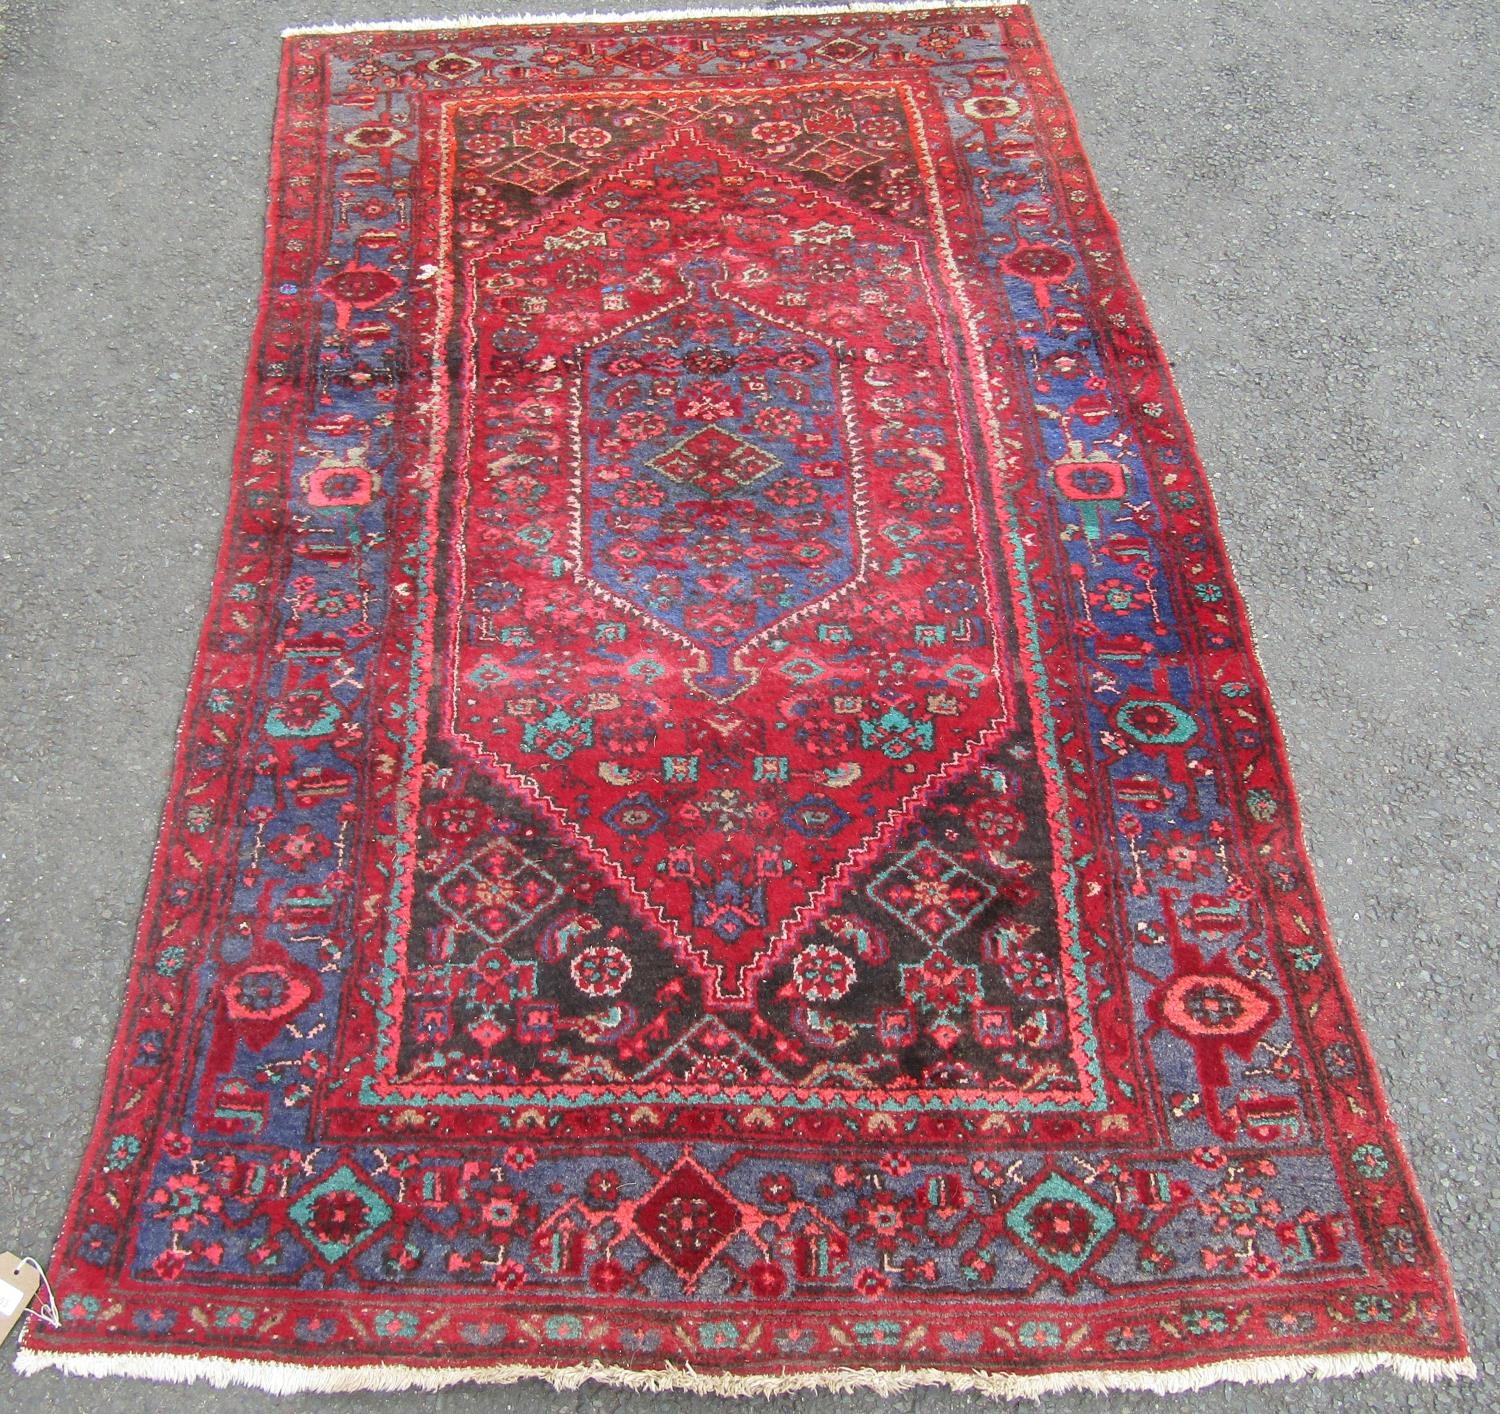 An old Middle Eastern rug with a central medallion and stylised floral pattern, 221cm x 131cm.